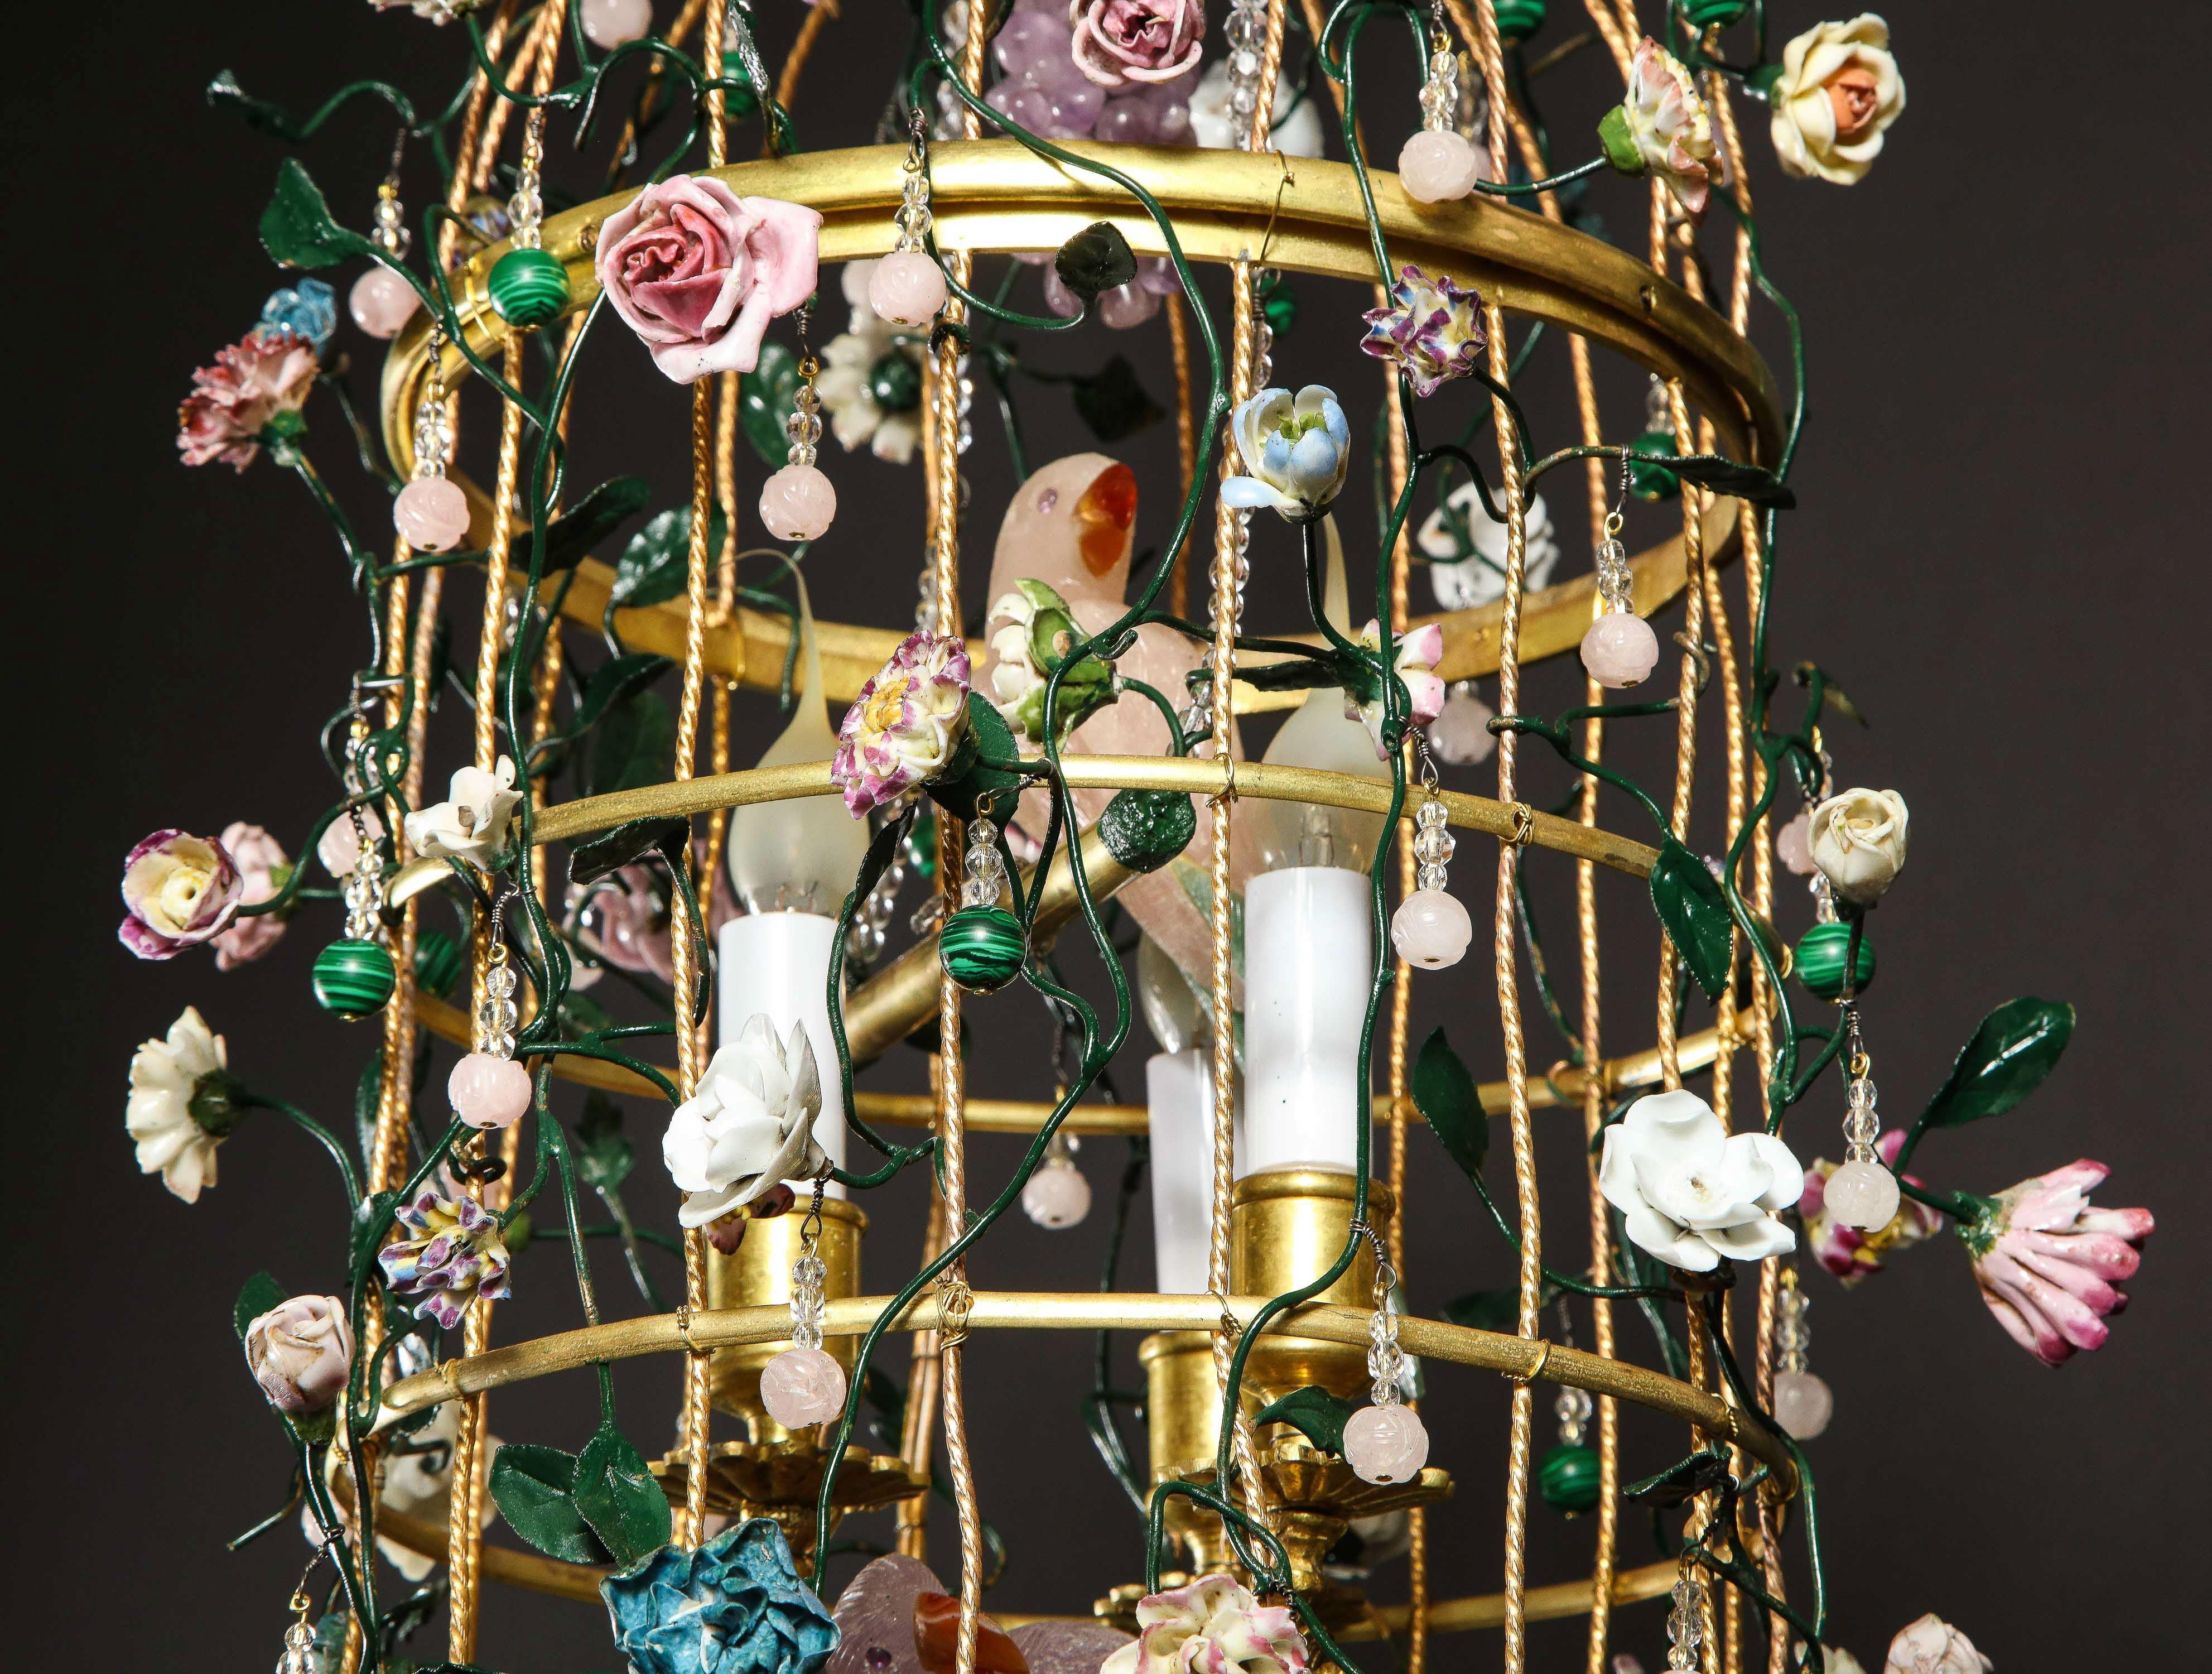 Hand-Crafted Birdcage Chandelier w/ 2 Rock Crystal Birds Perched Inside W/ Porcelain Flowers For Sale